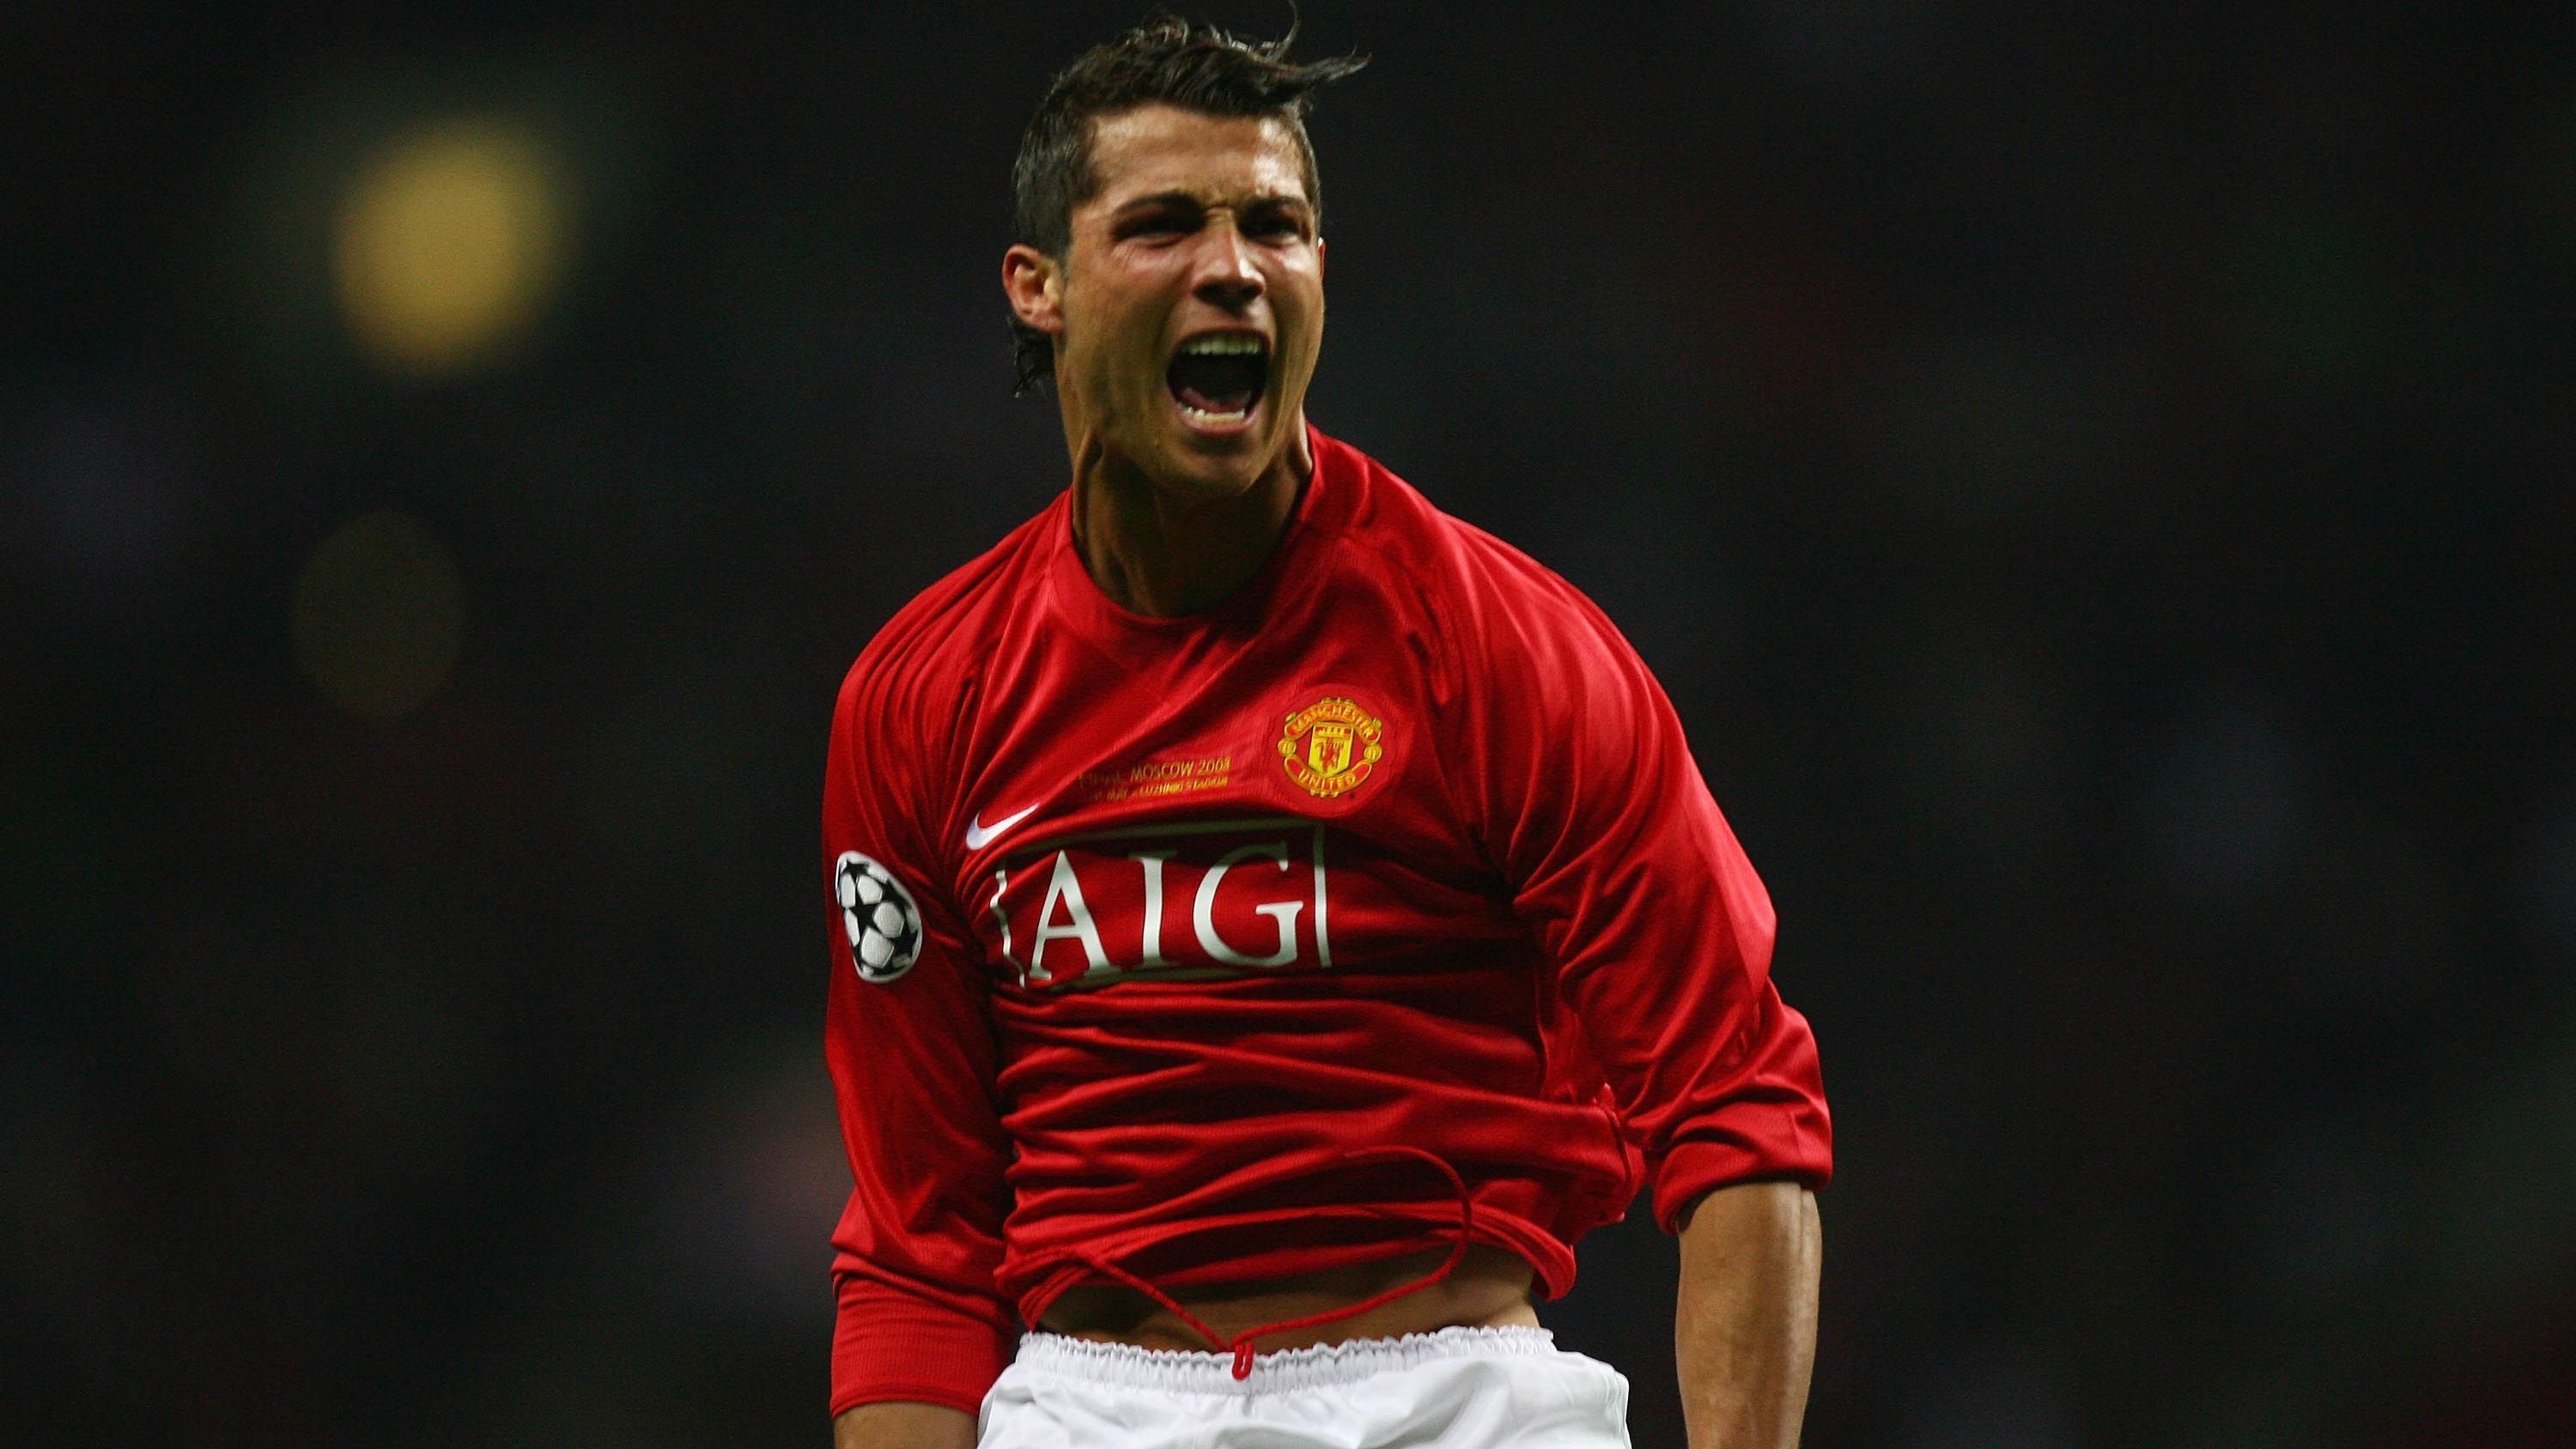 
                <strong>2008: Cristiano Ronaldo </strong><br>
                &#x2022; Nationalität: Portugal<br>&#x2022; damaliger Verein: Manchester United <br>
              